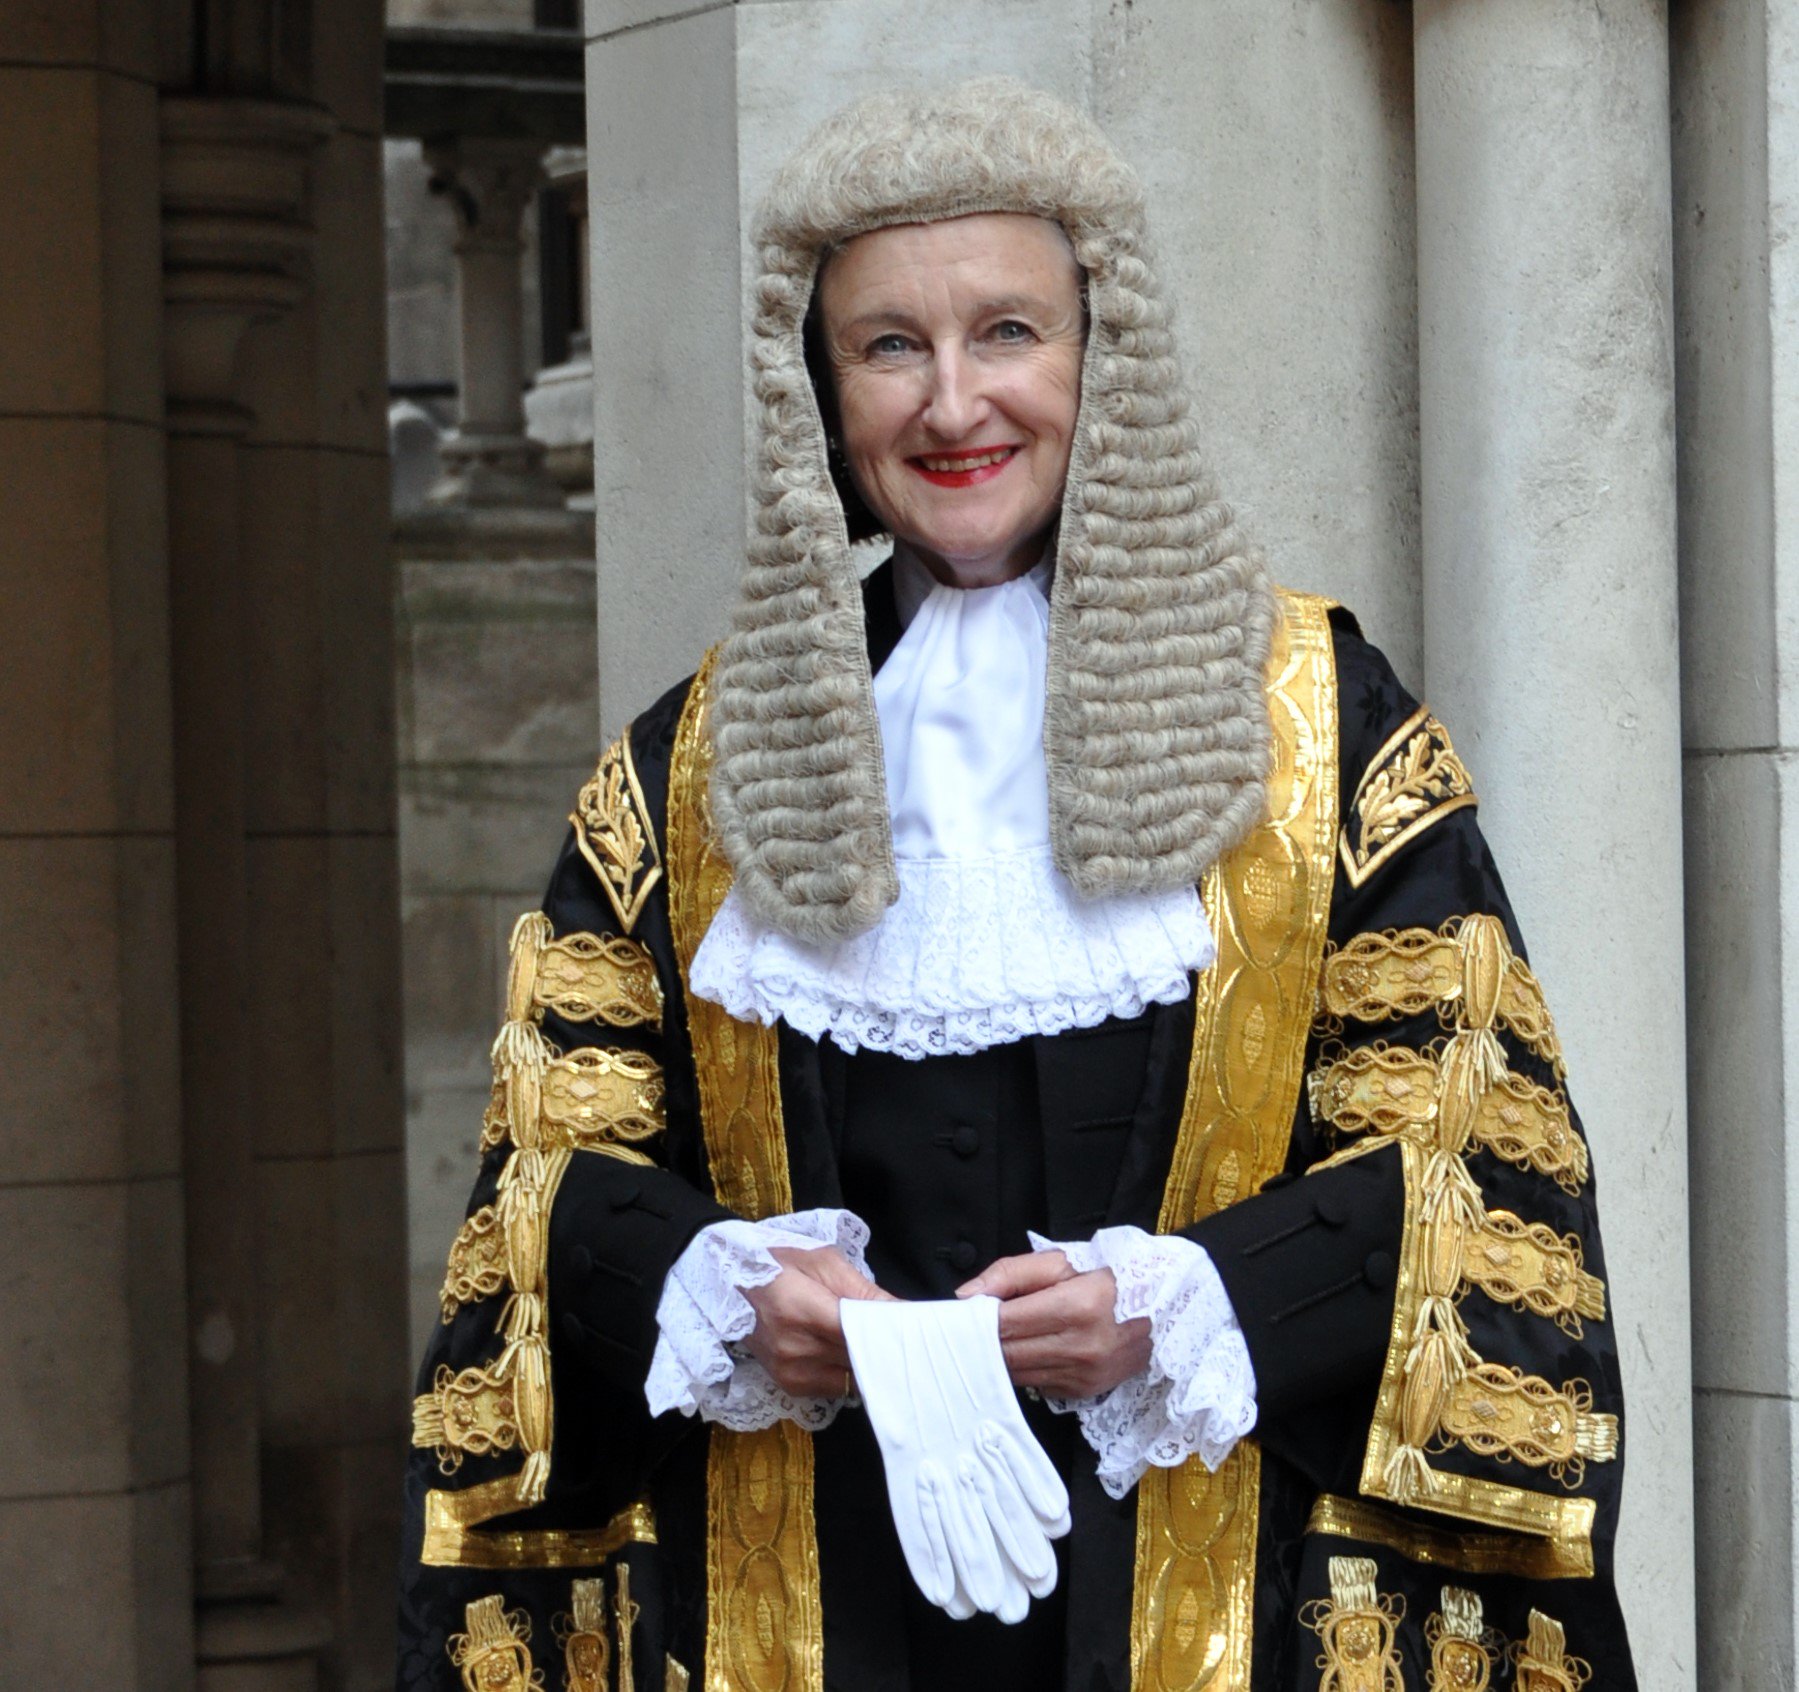 In pictures... New Court of Appeal judge & QC delivers inaugural lecture